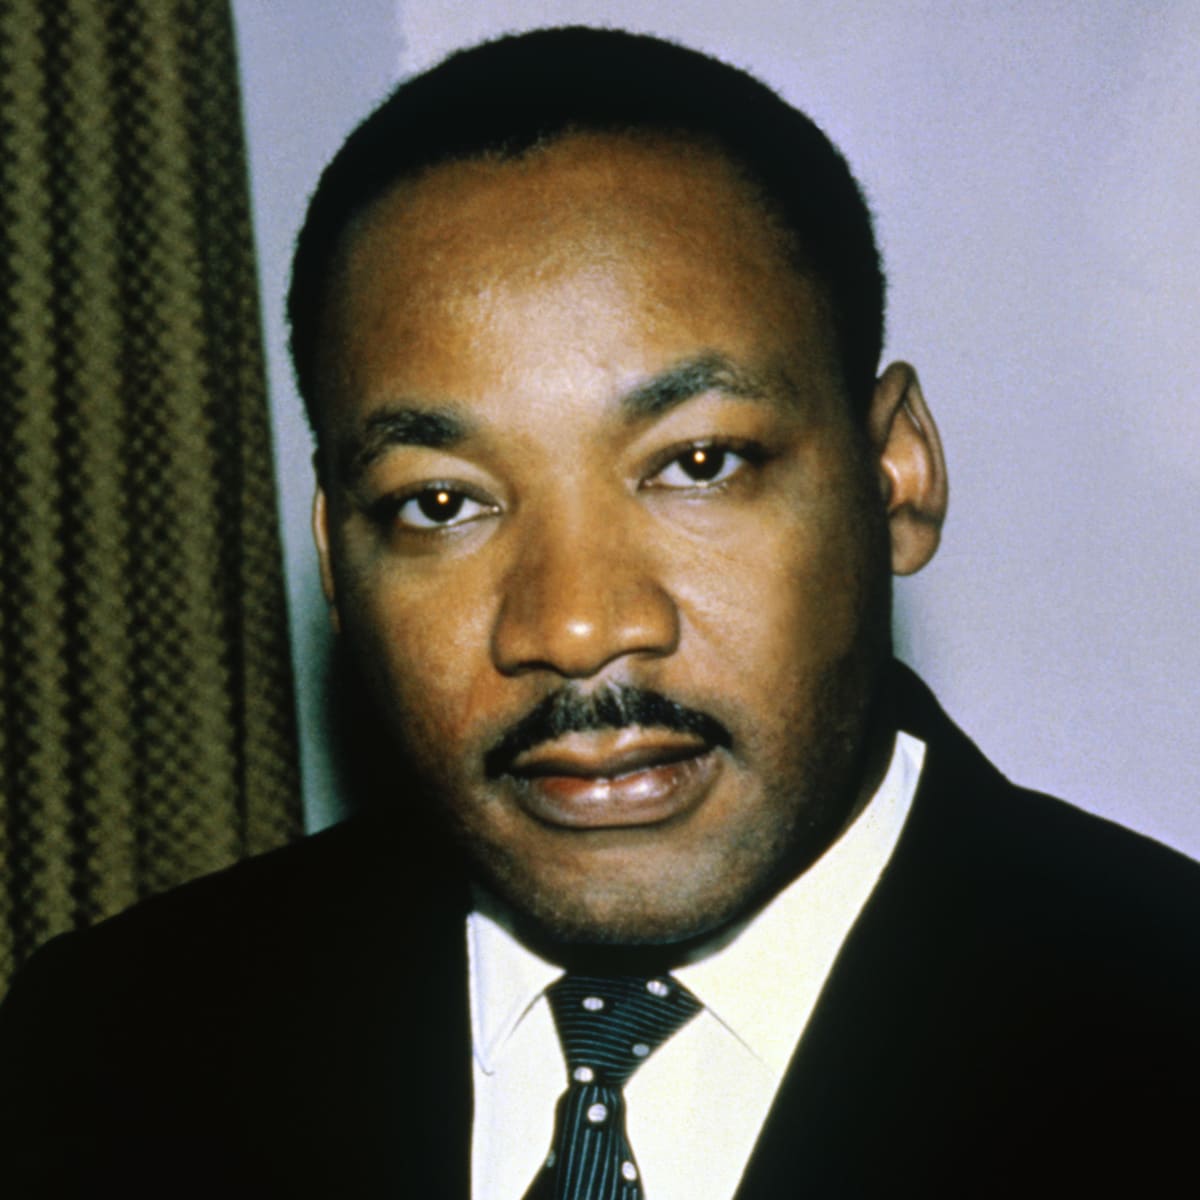 Martin-Luther-King-cy-Bettmann-Archive, MLK Day Special: Dr. Martin Luther King Jr. in his own words, World News & Views 